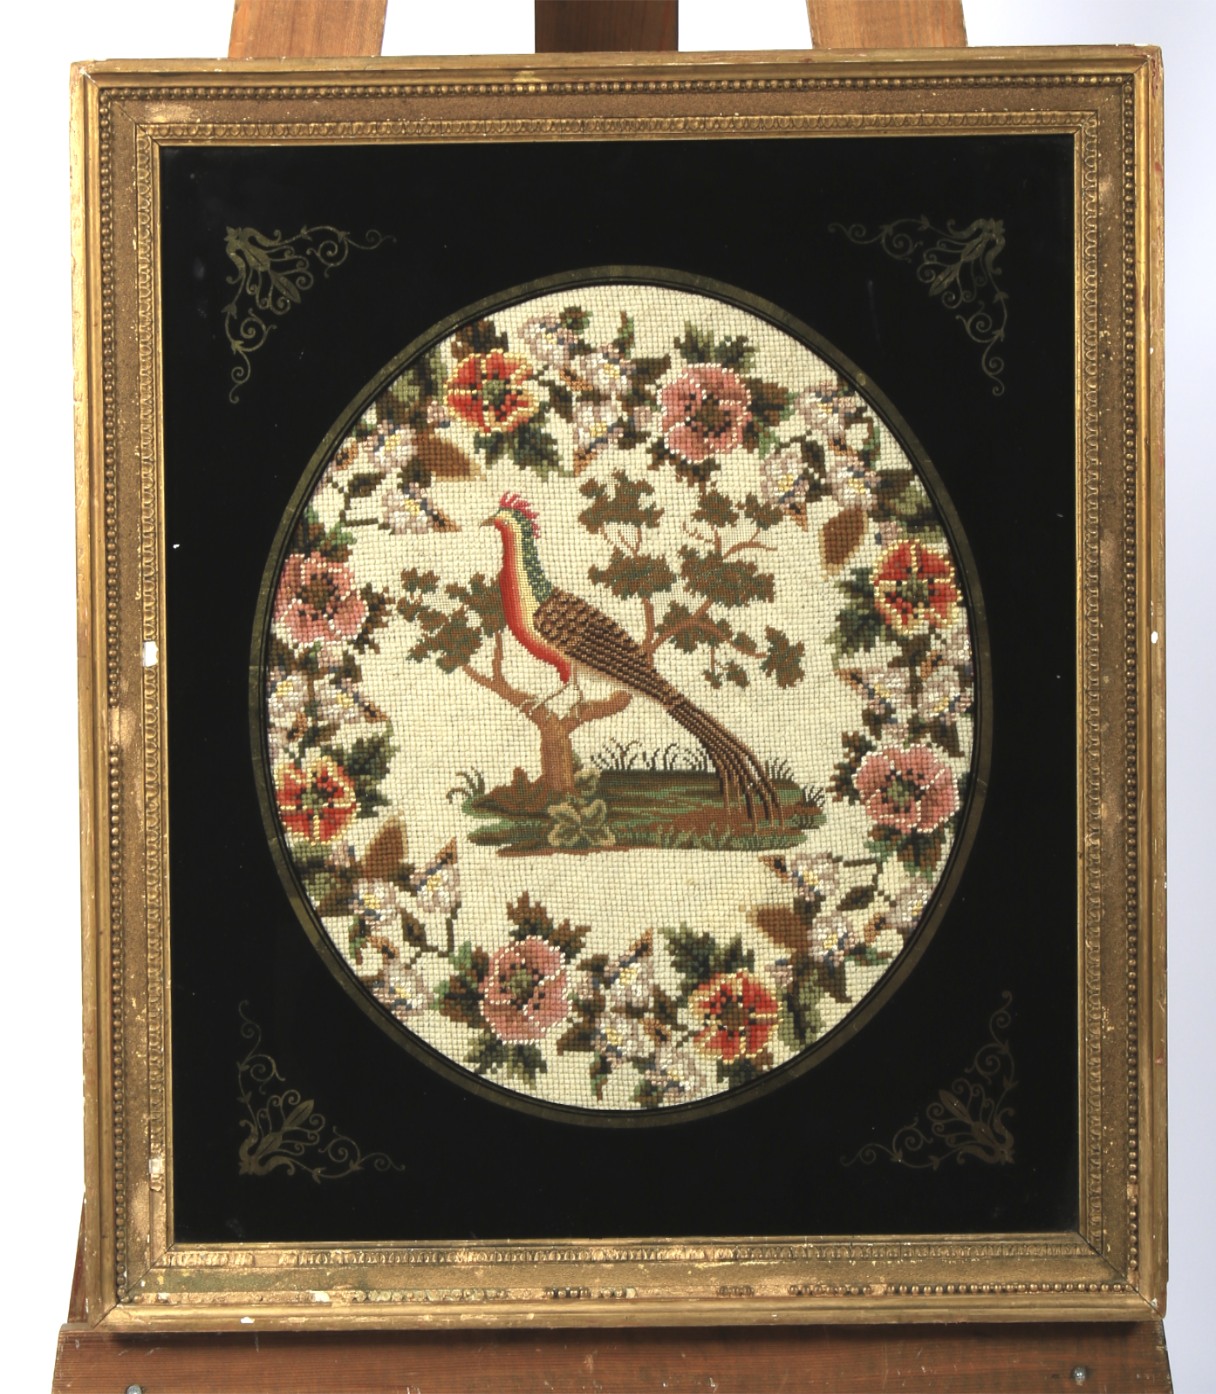 A Victorian needlework in verre eglomise giltwood frame.